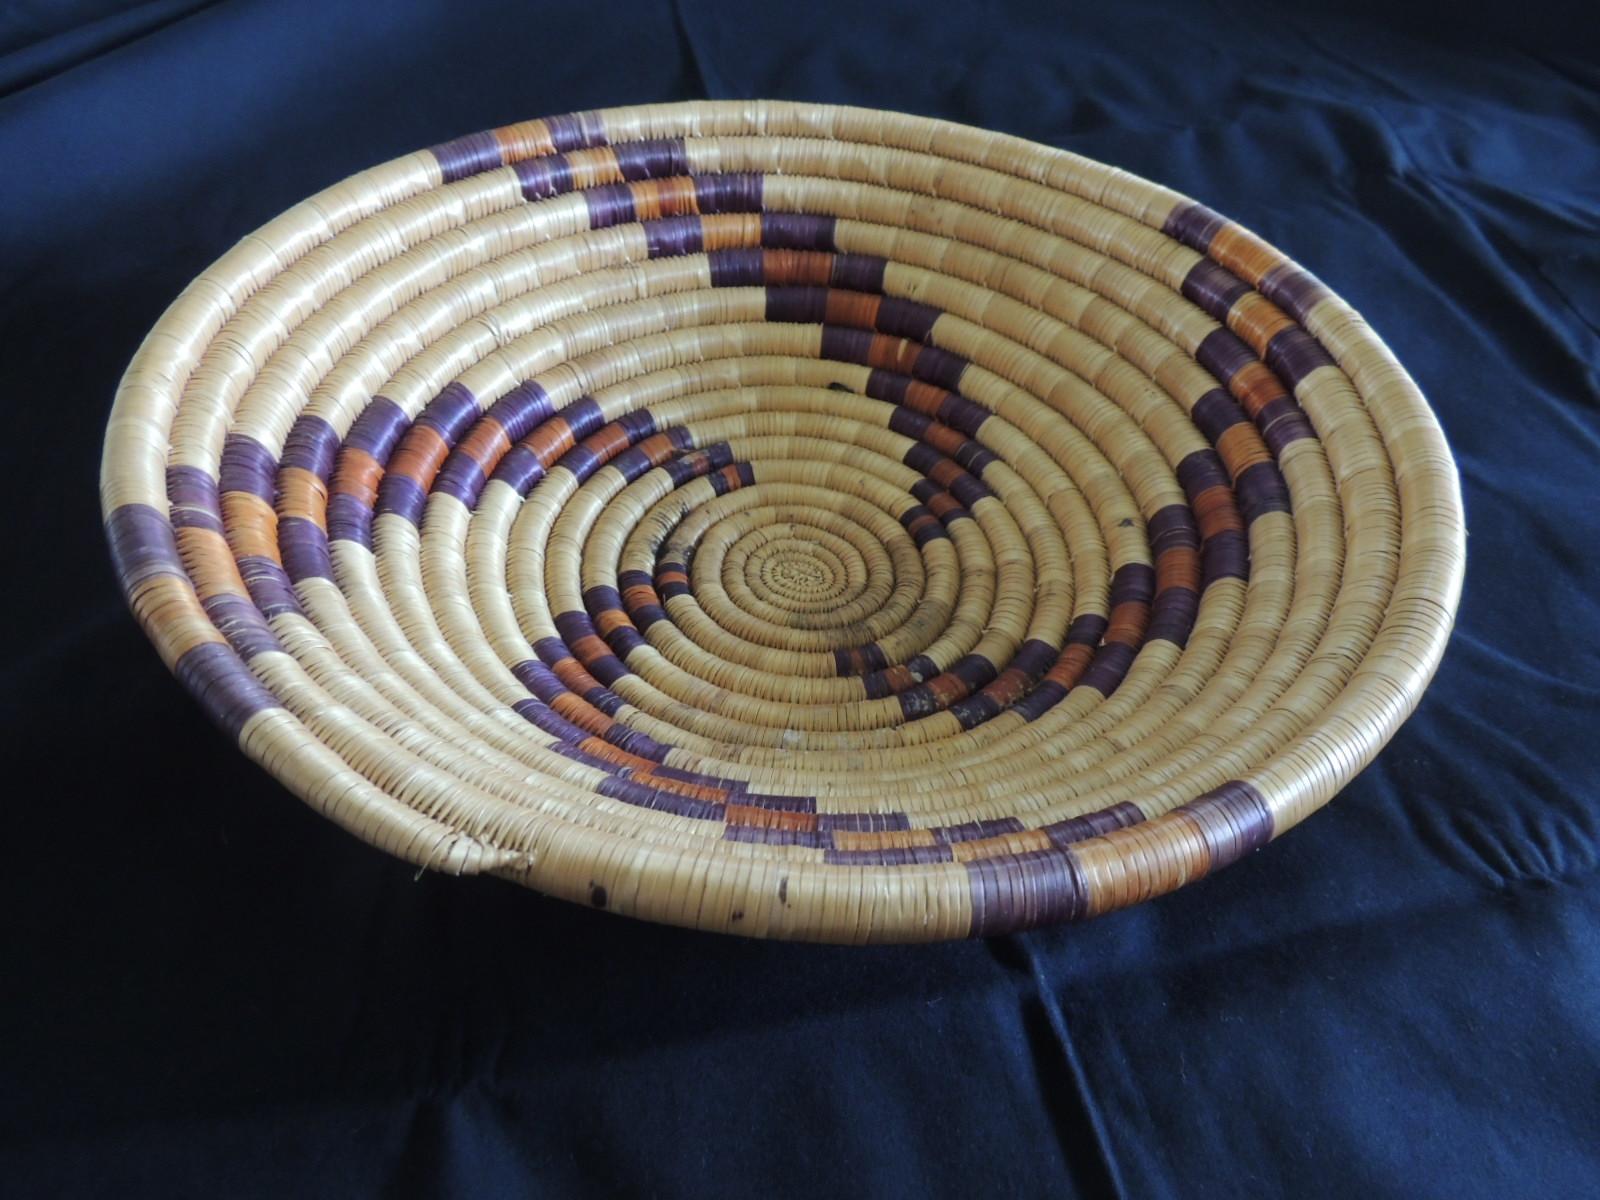 Woven coil round orange and purple basket
Artisanal hand woven basket with tribal designs and patterns all around.
(Is not flat is more like a deep bowl shape)
Africa, 1990s.
Size: 12.5